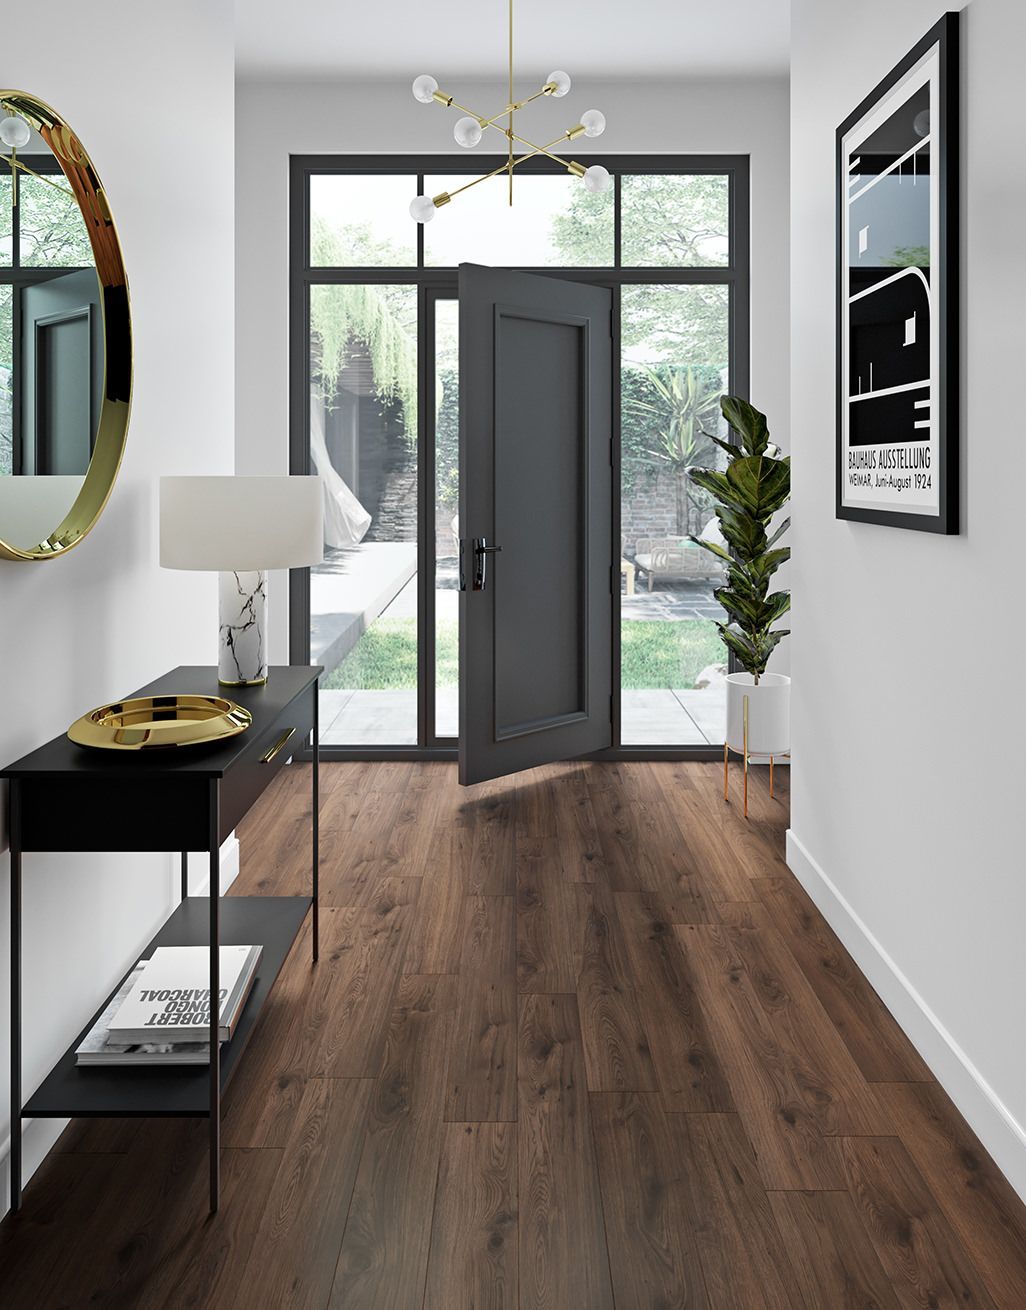 How to Choose the Perfect Laminated Wood
Flooring for Your Space